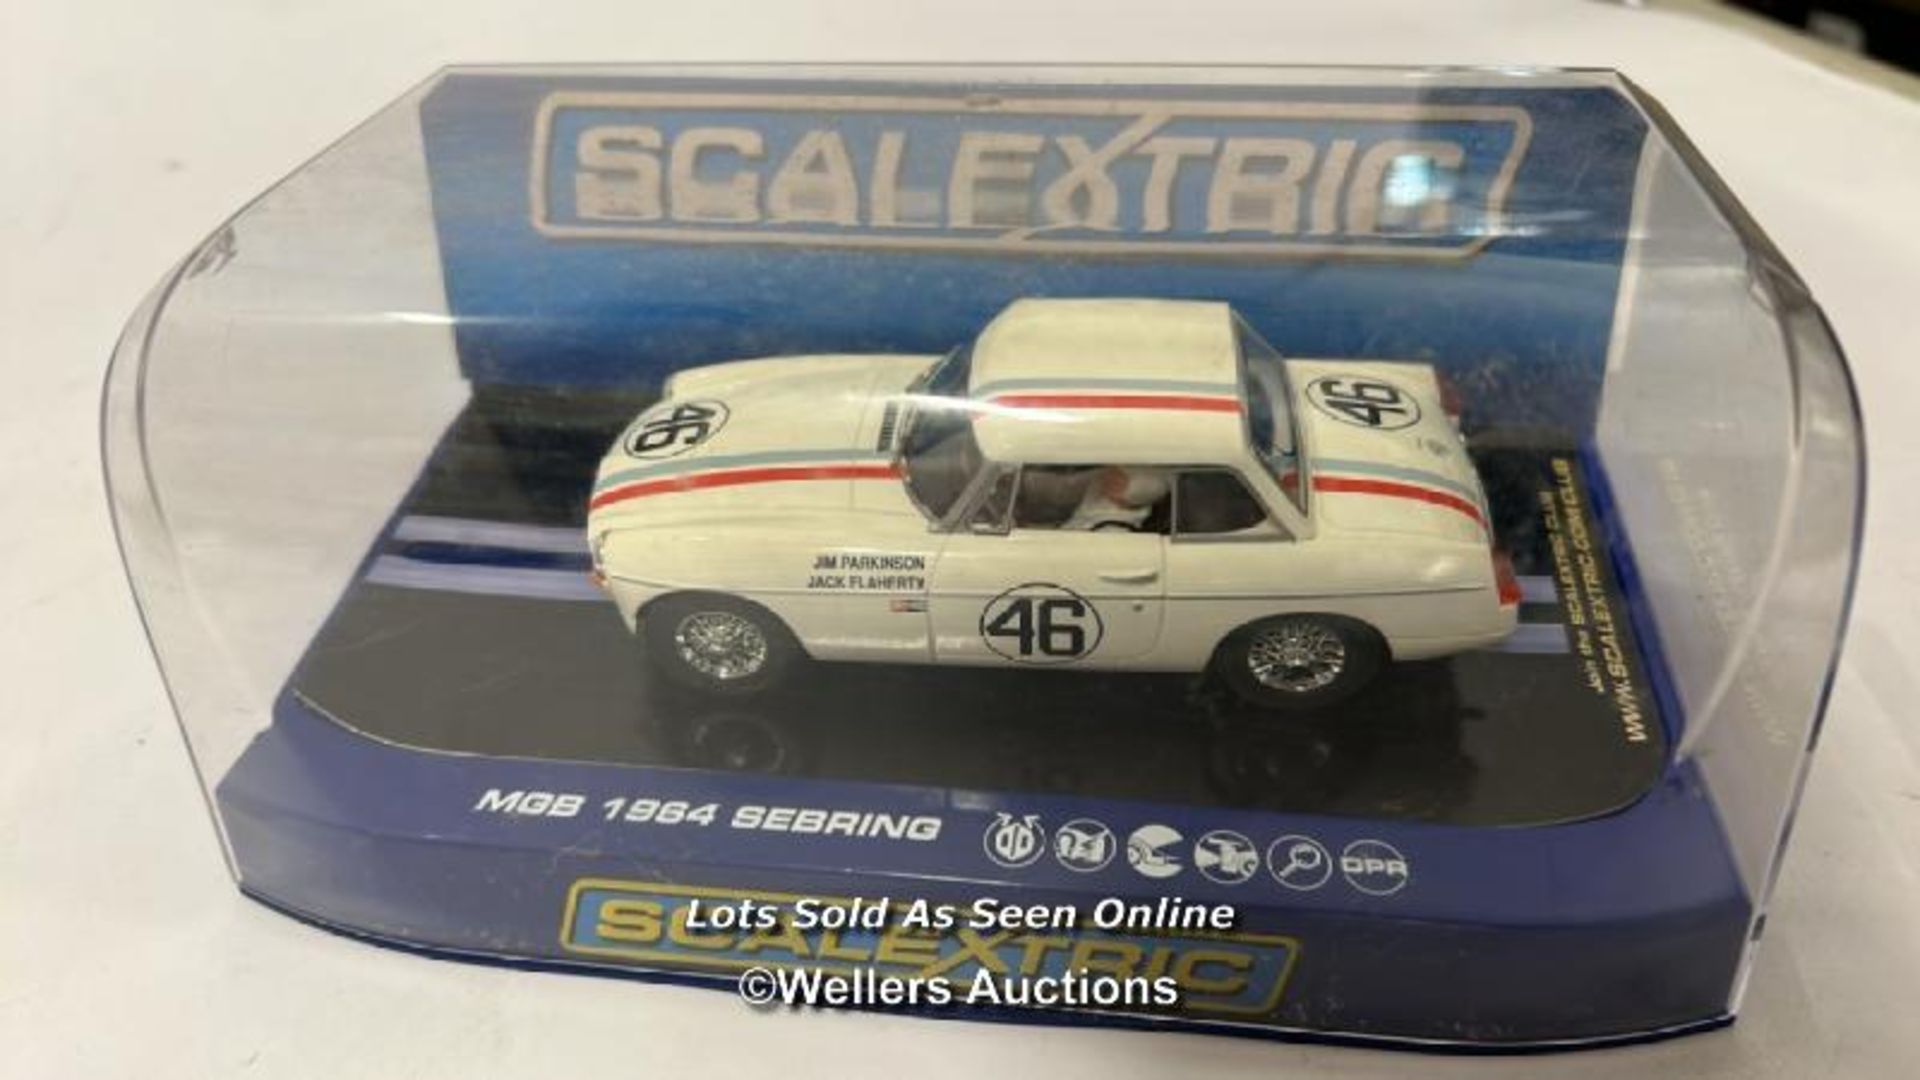 Three boxed & unboxed Scalextric cars including MGB 1964 Sebring and Mitsubishi Lancer / AN4 - Image 2 of 4